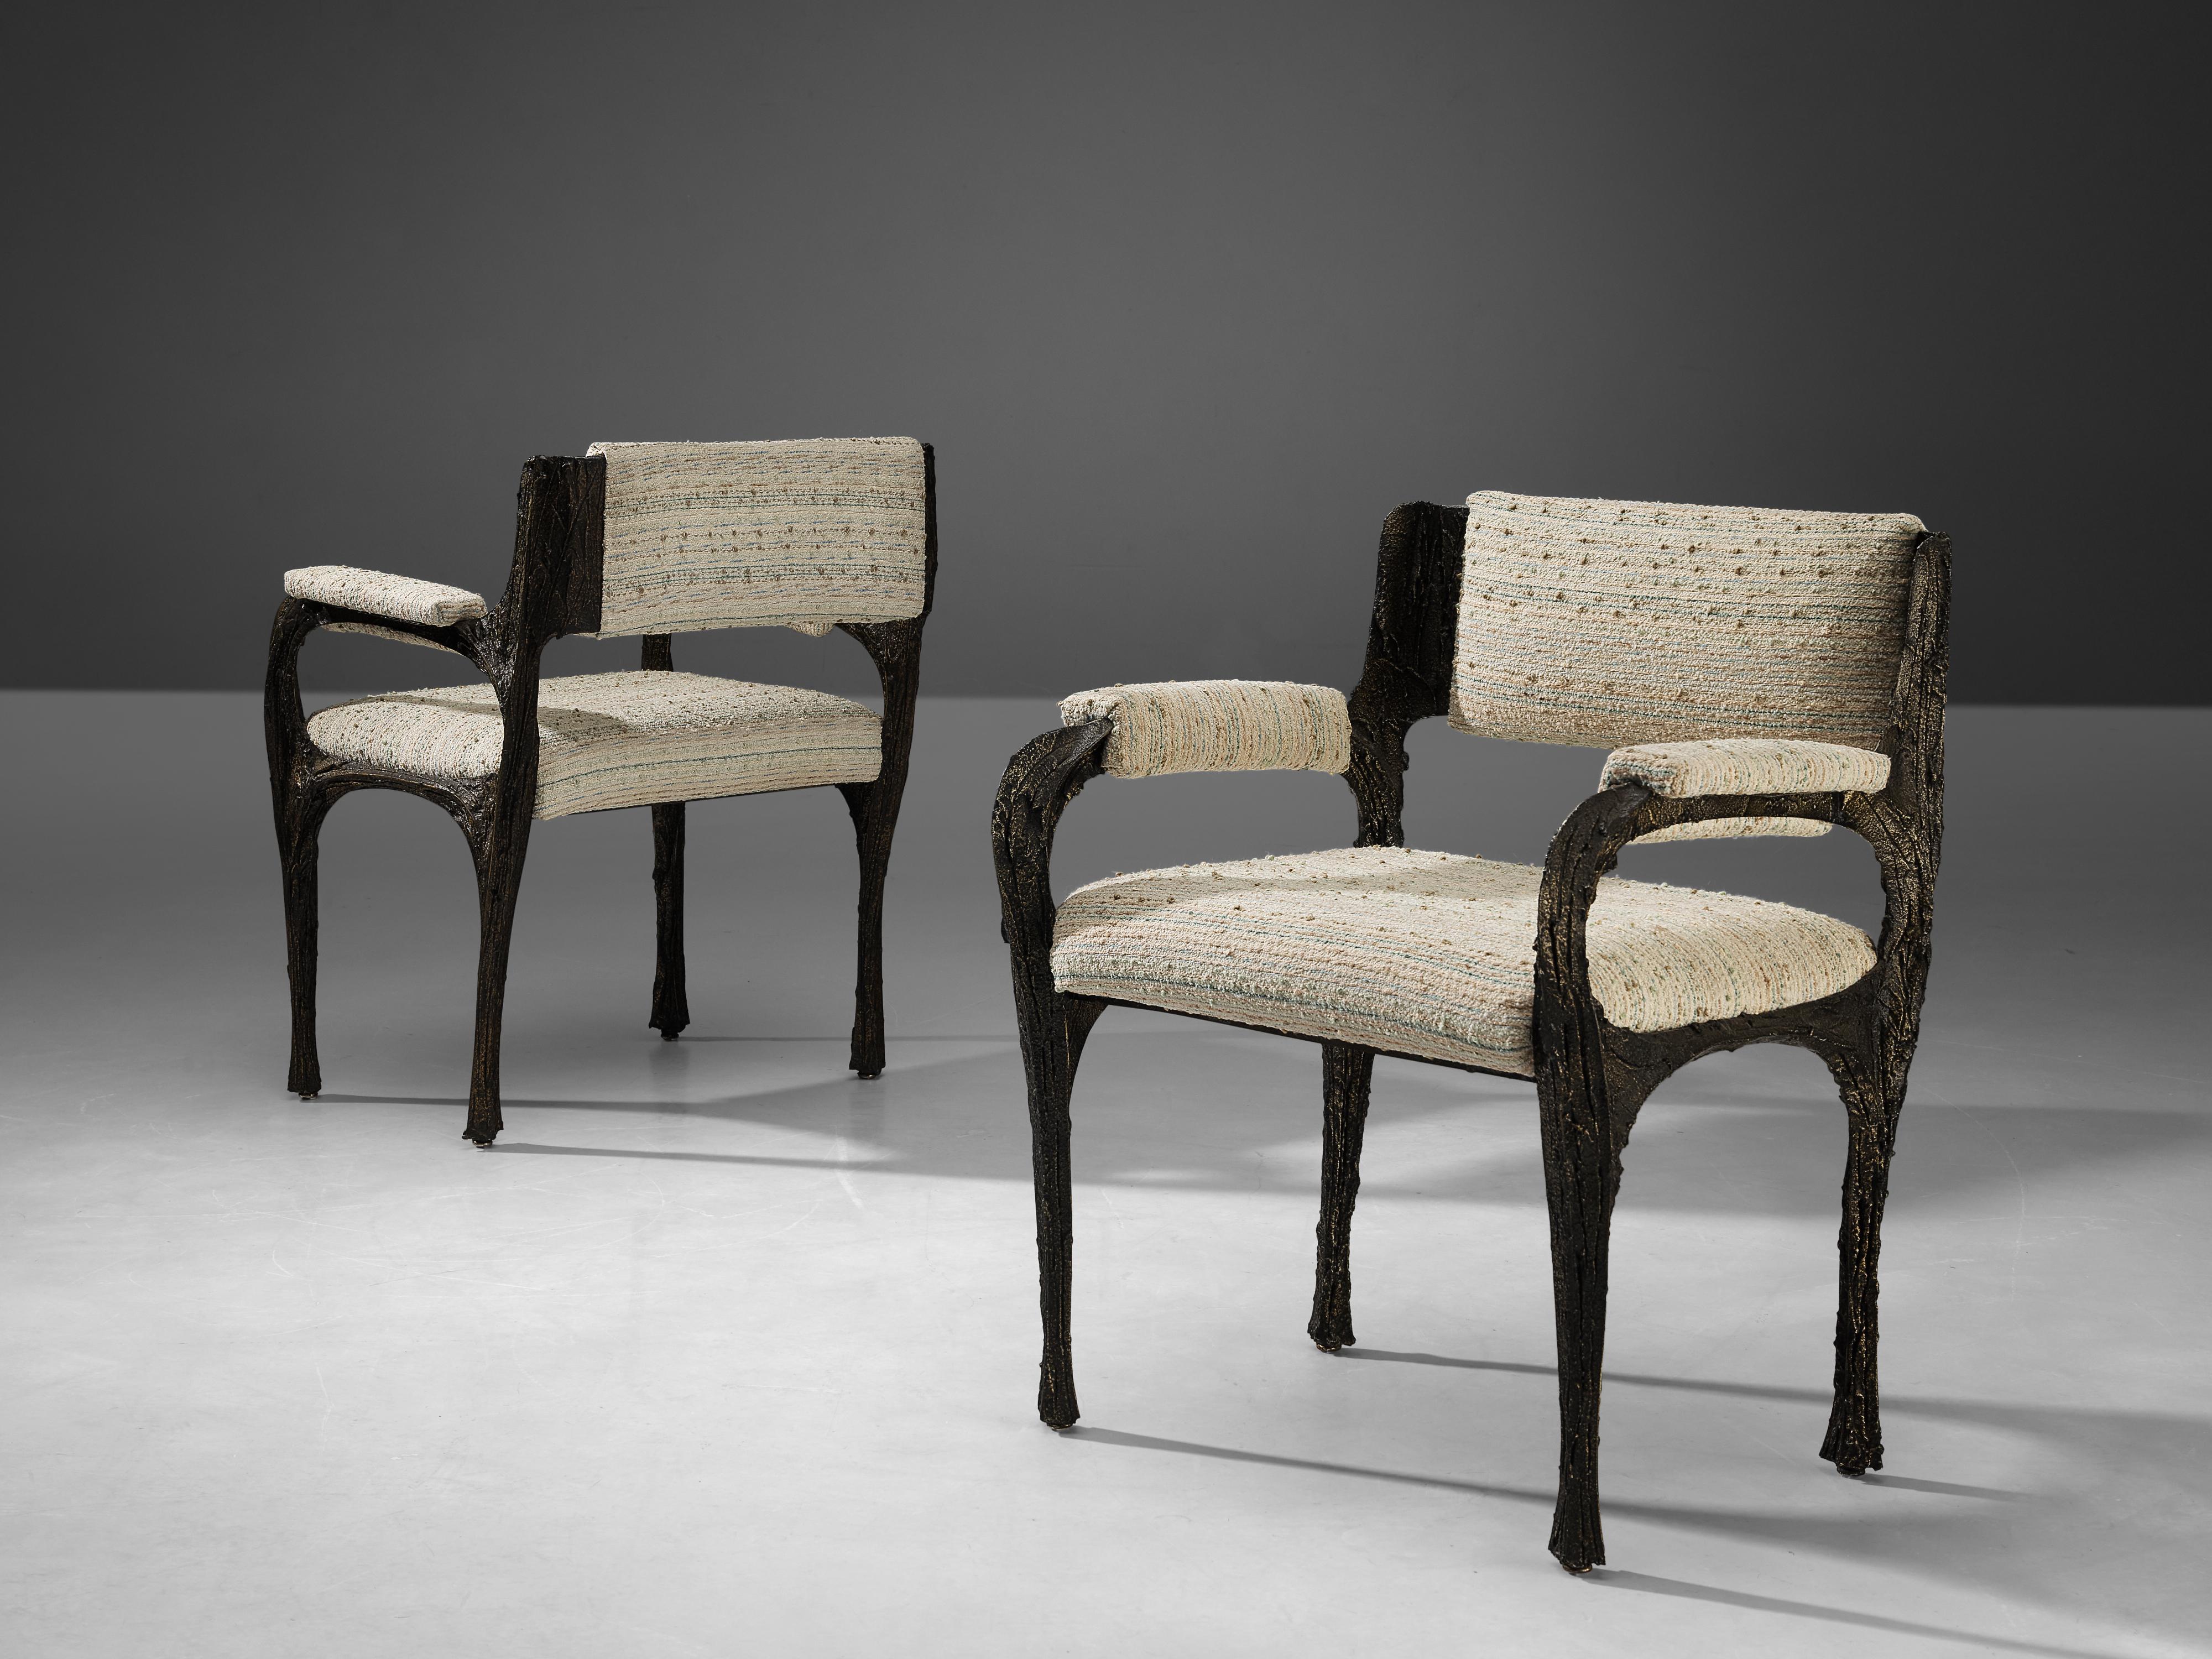 Paul Evans for Directional, pair of armchairs from the series PE-105, sculpted bronze, fabric, United States, circa 1965 

These armchairs are designed by Paul Evans for Directional around 1965. This design excels in craftsmanship, material use,